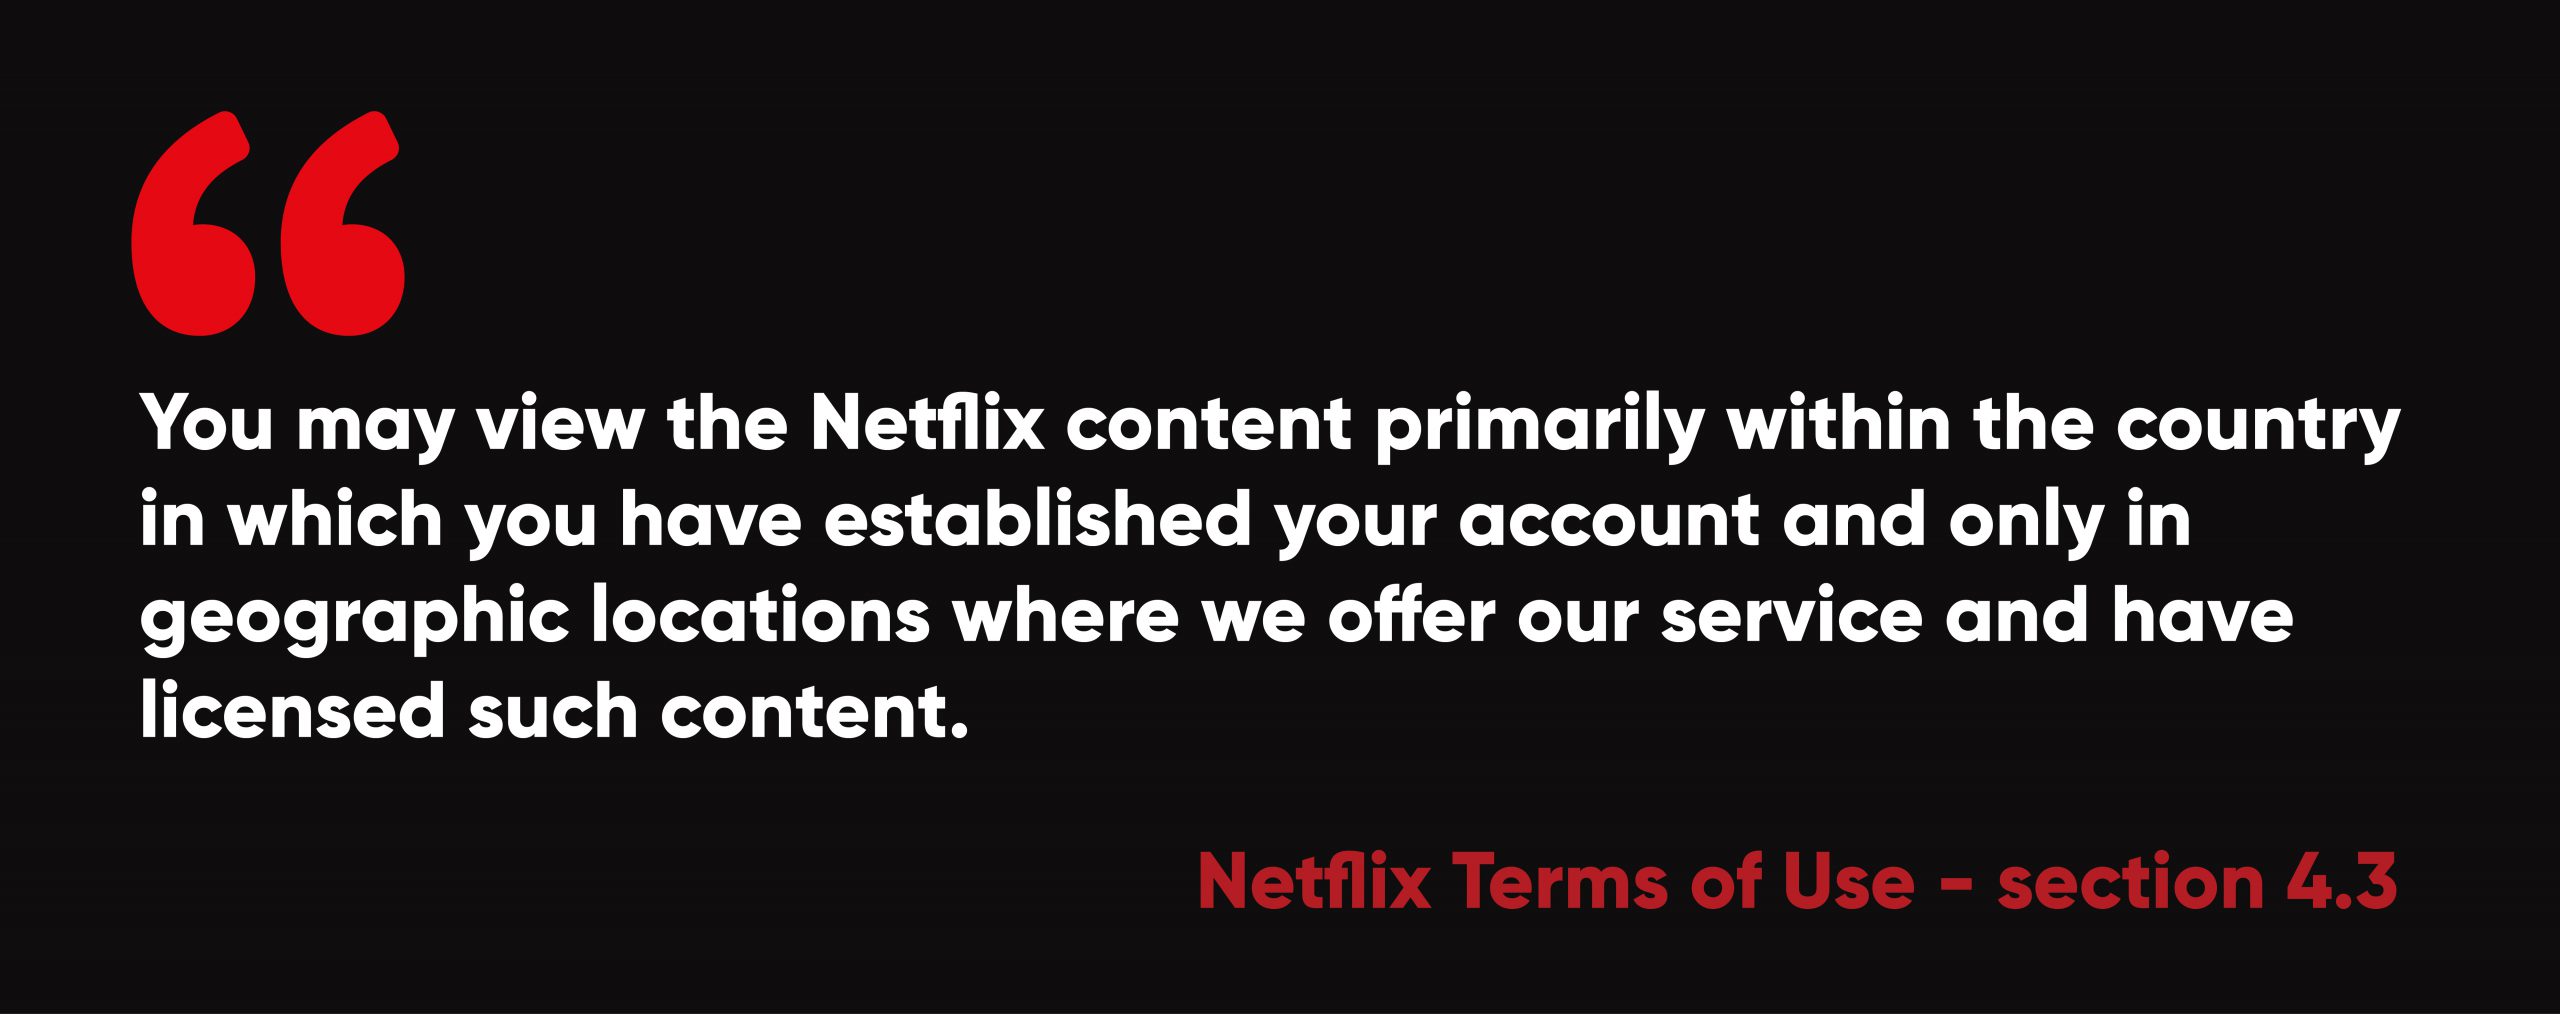 International streaming services